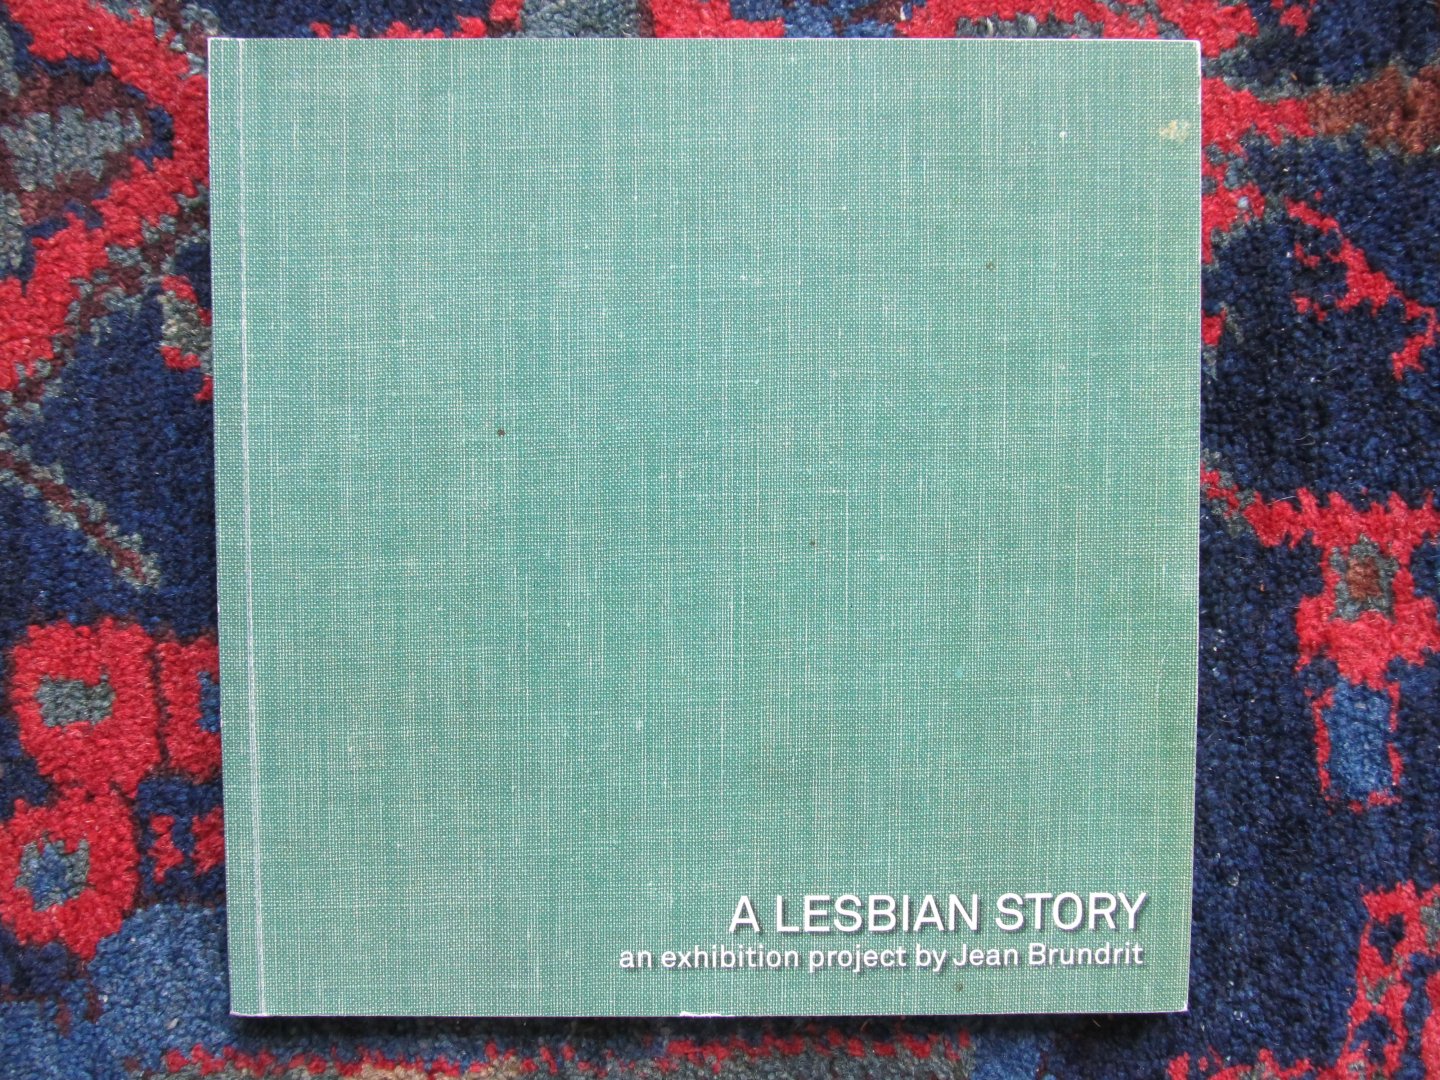 Brundrit, Jean - A LESBIAN STORY an exhibition project by Jean Brundrit